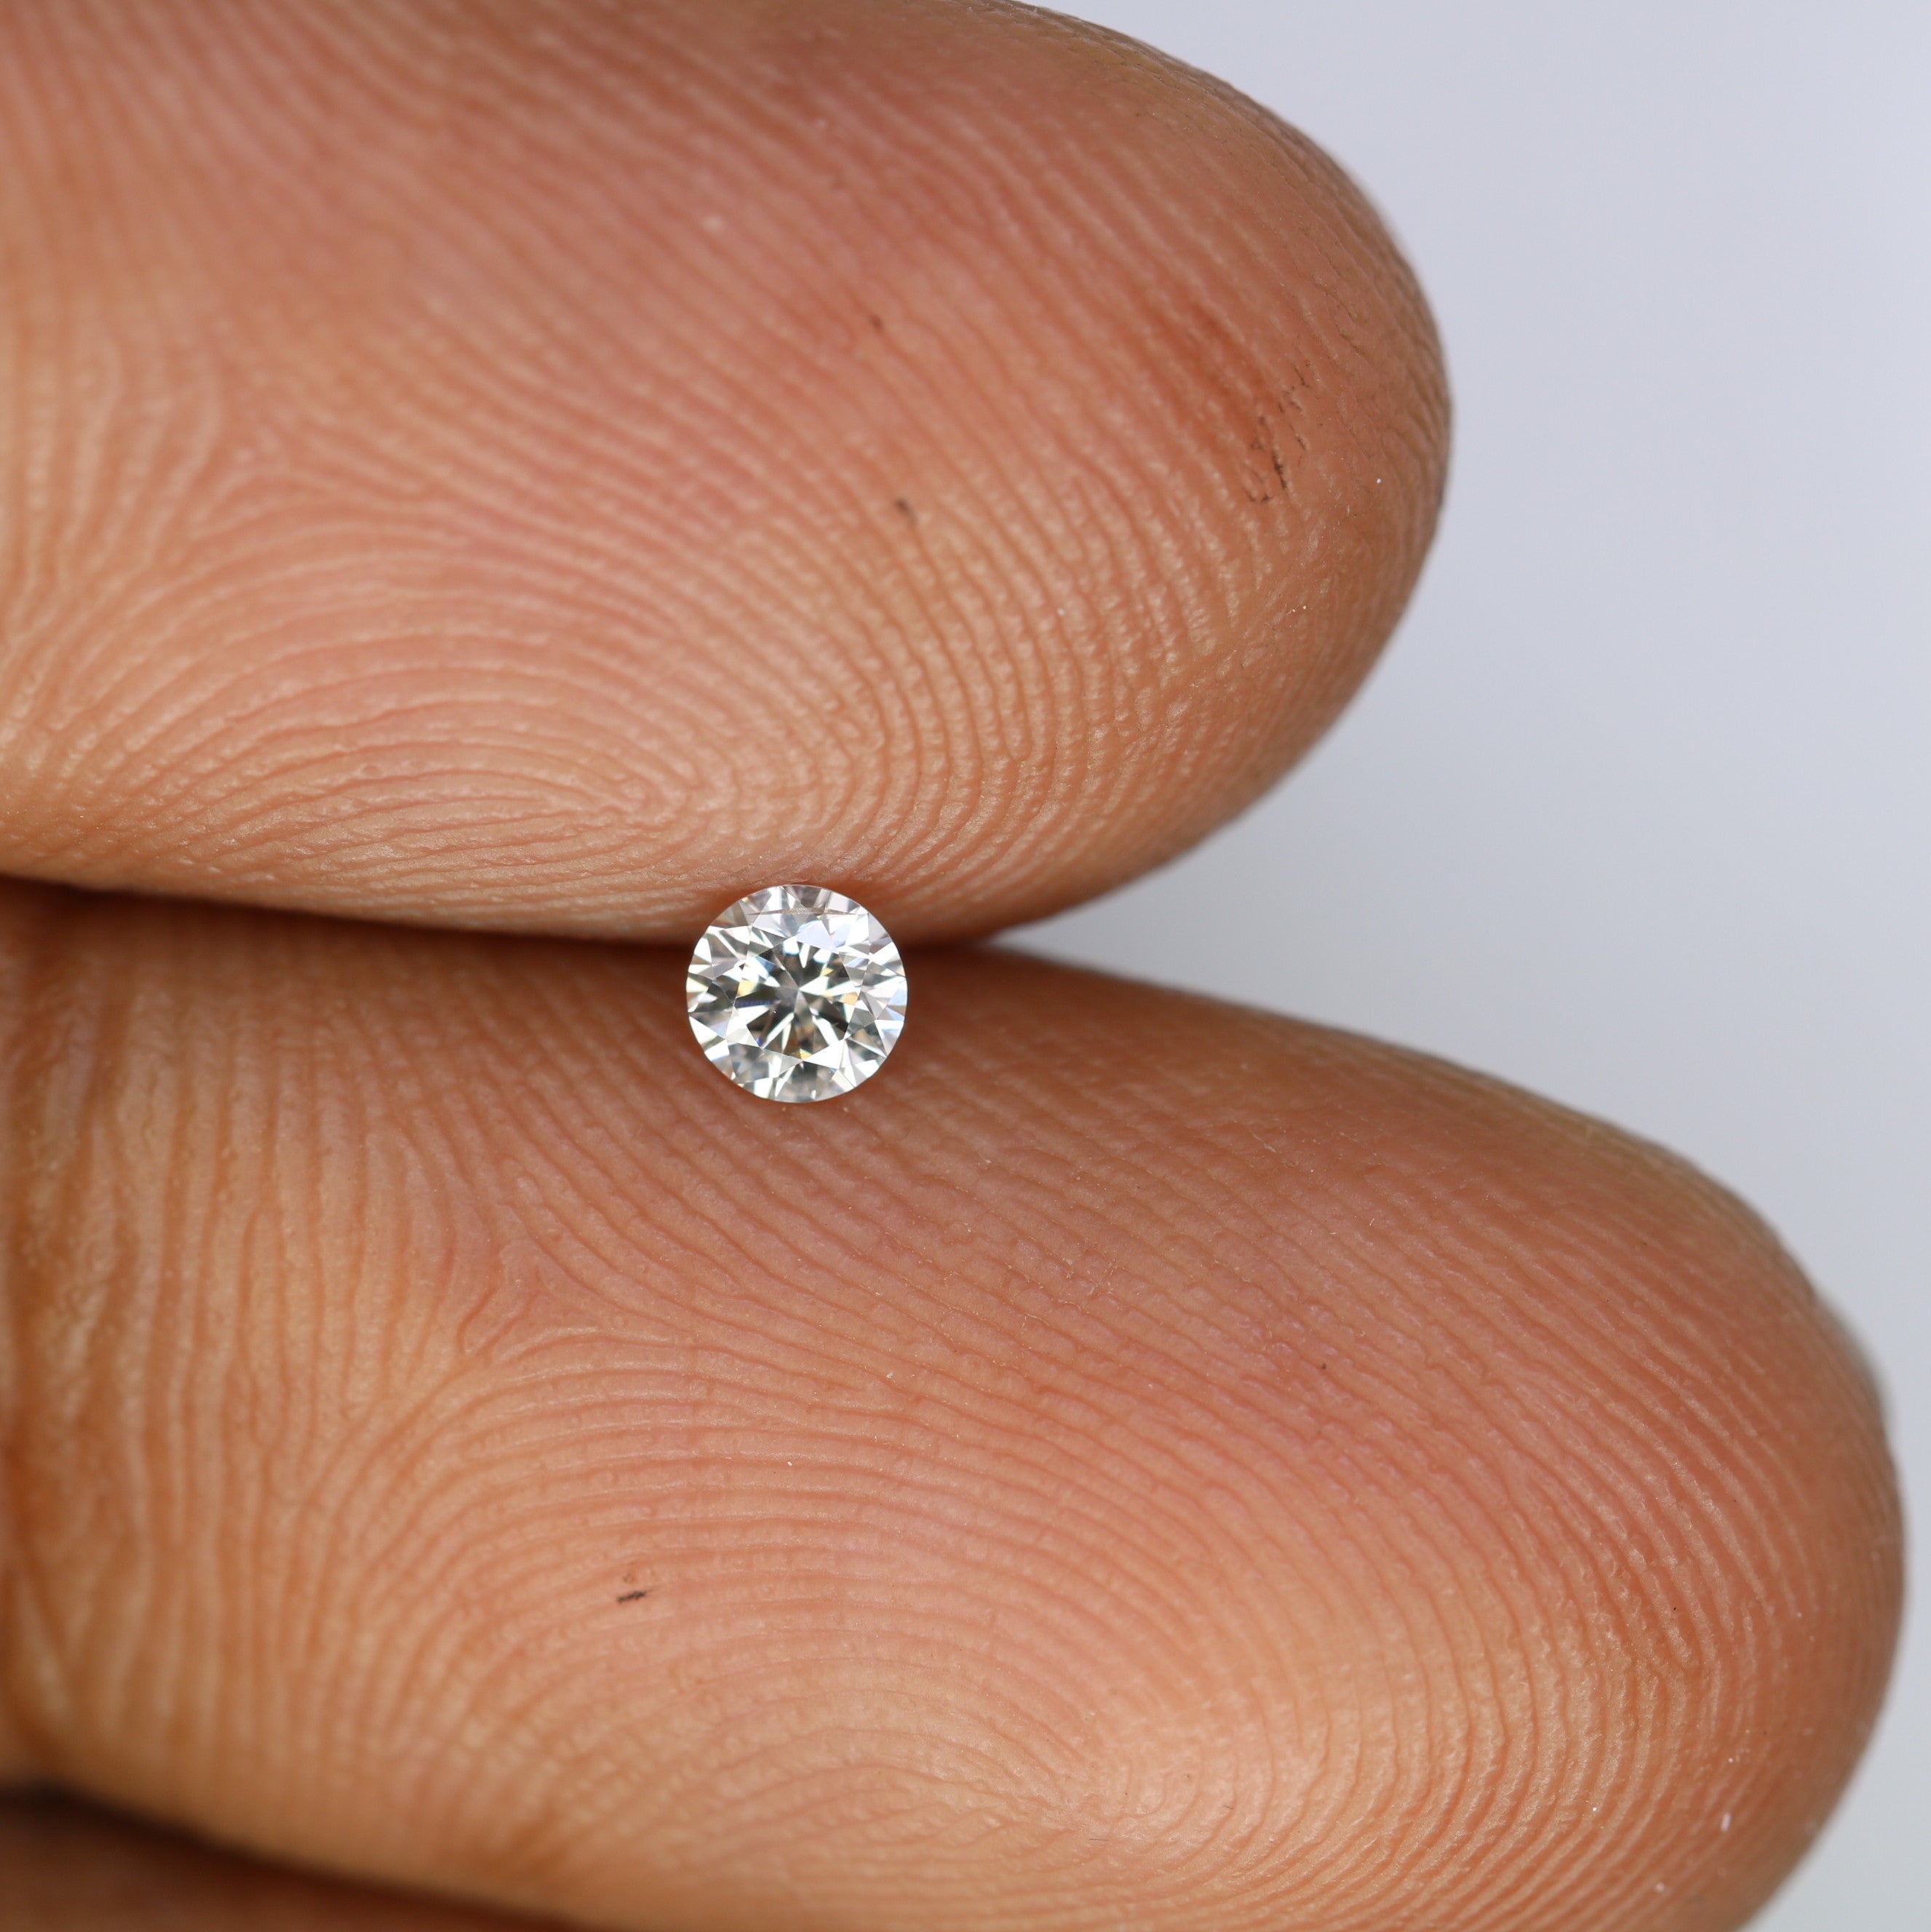 0.15 CT 3.40 x 2.10 MM Very Light Green Round Brilliant Cut Diamond For Engagement Ring